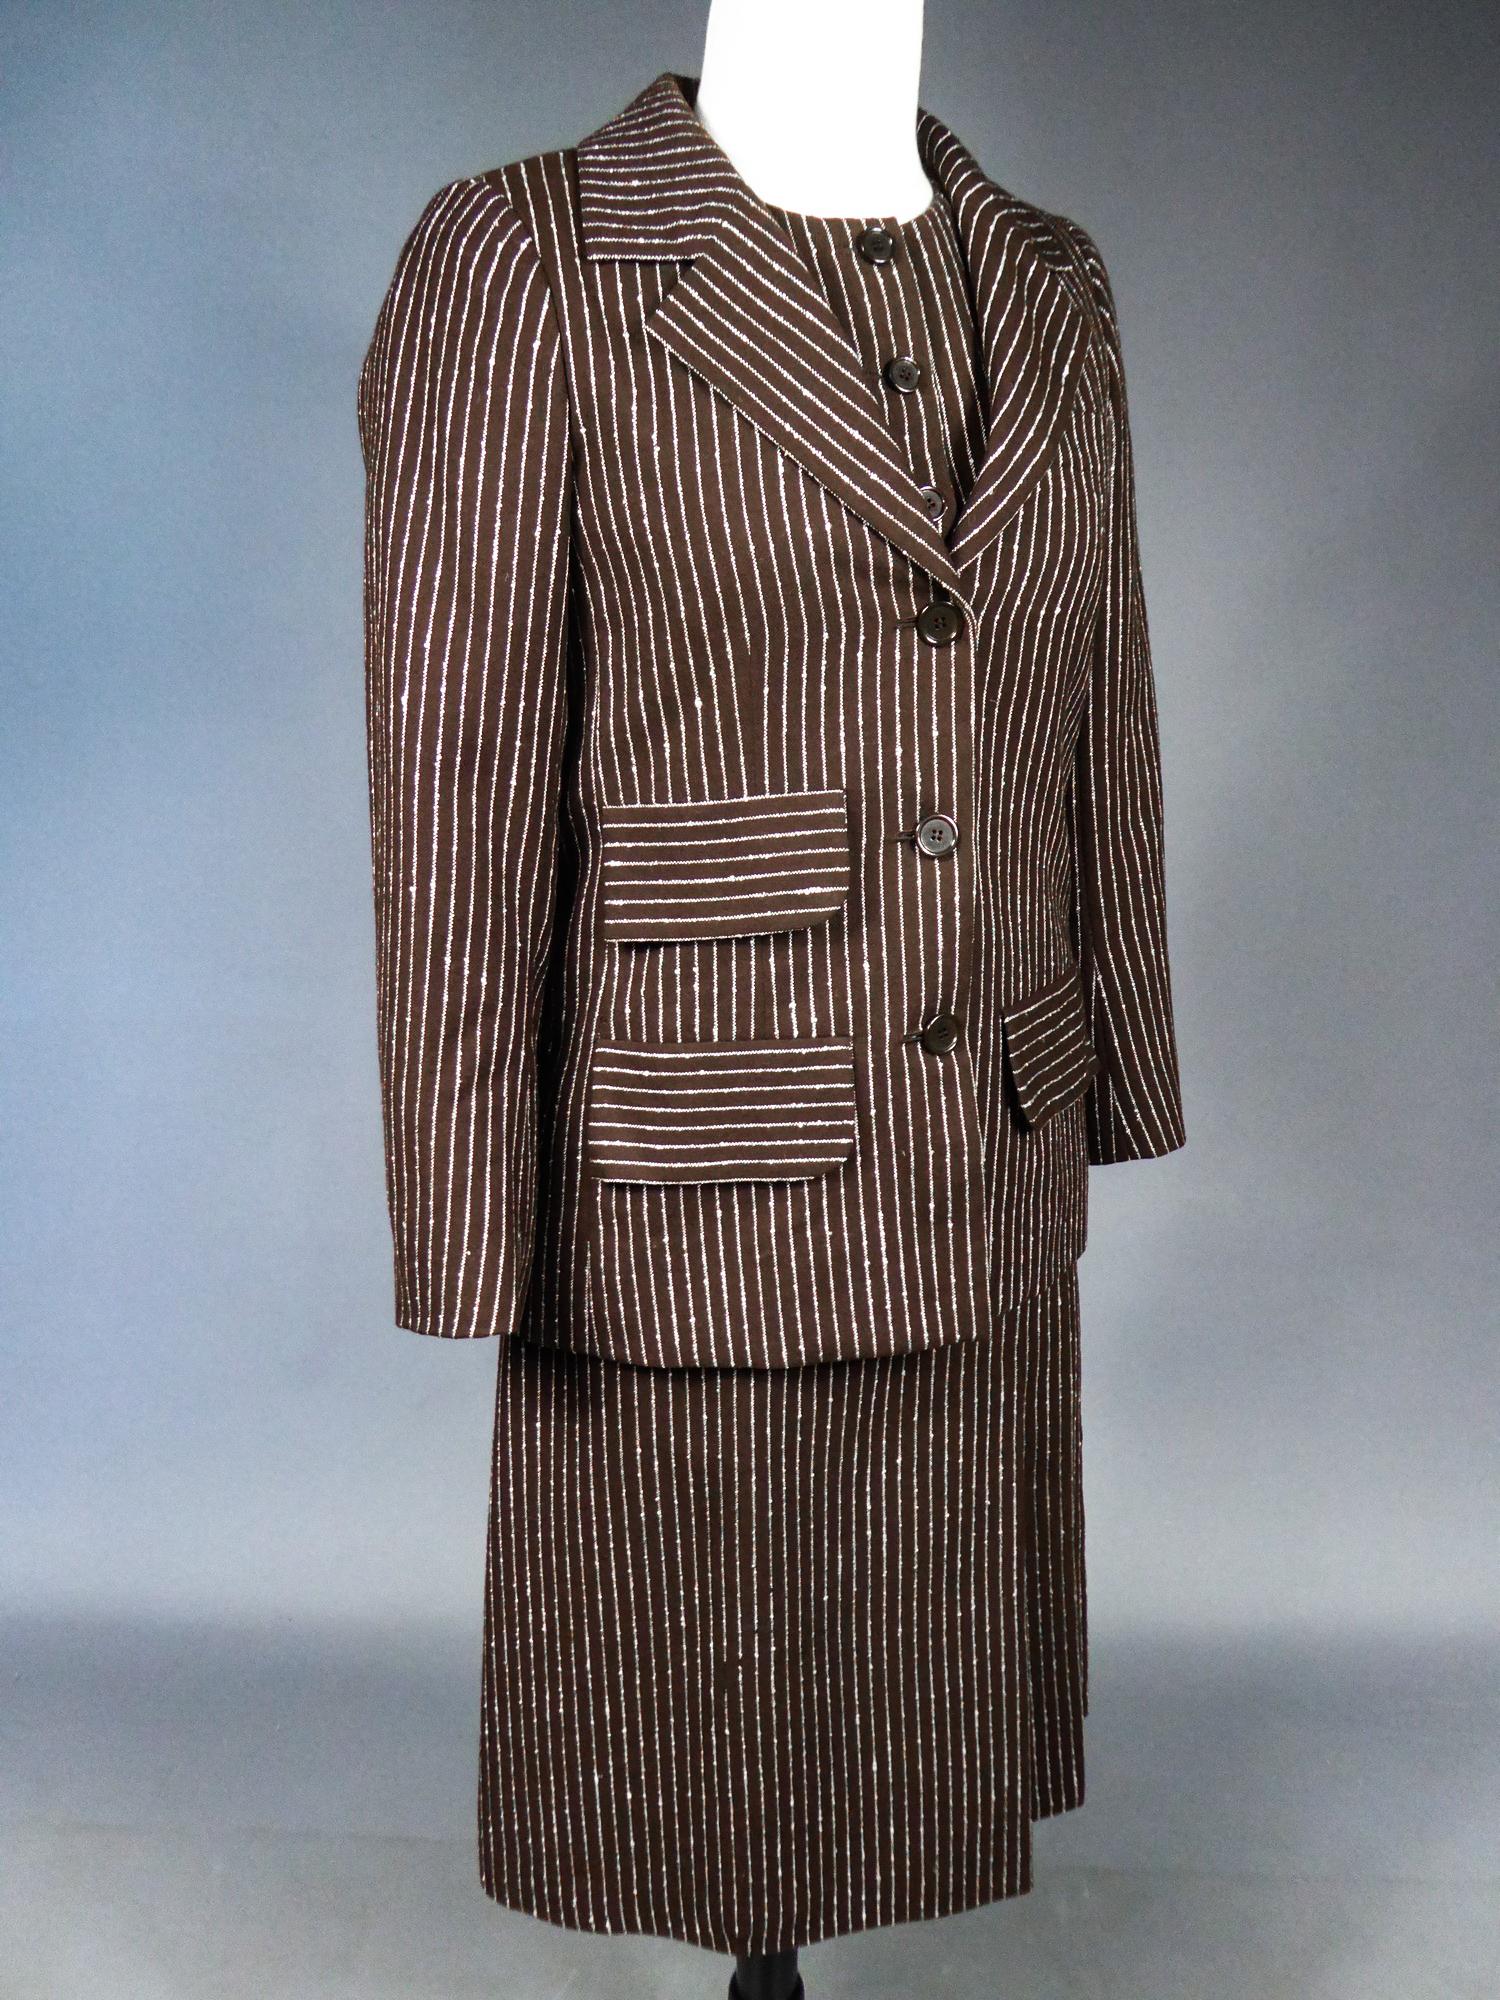 Yves Saint Laurent Haute Couture skirt-suit numbered 14539 Circa 1967/1970 For Sale 2